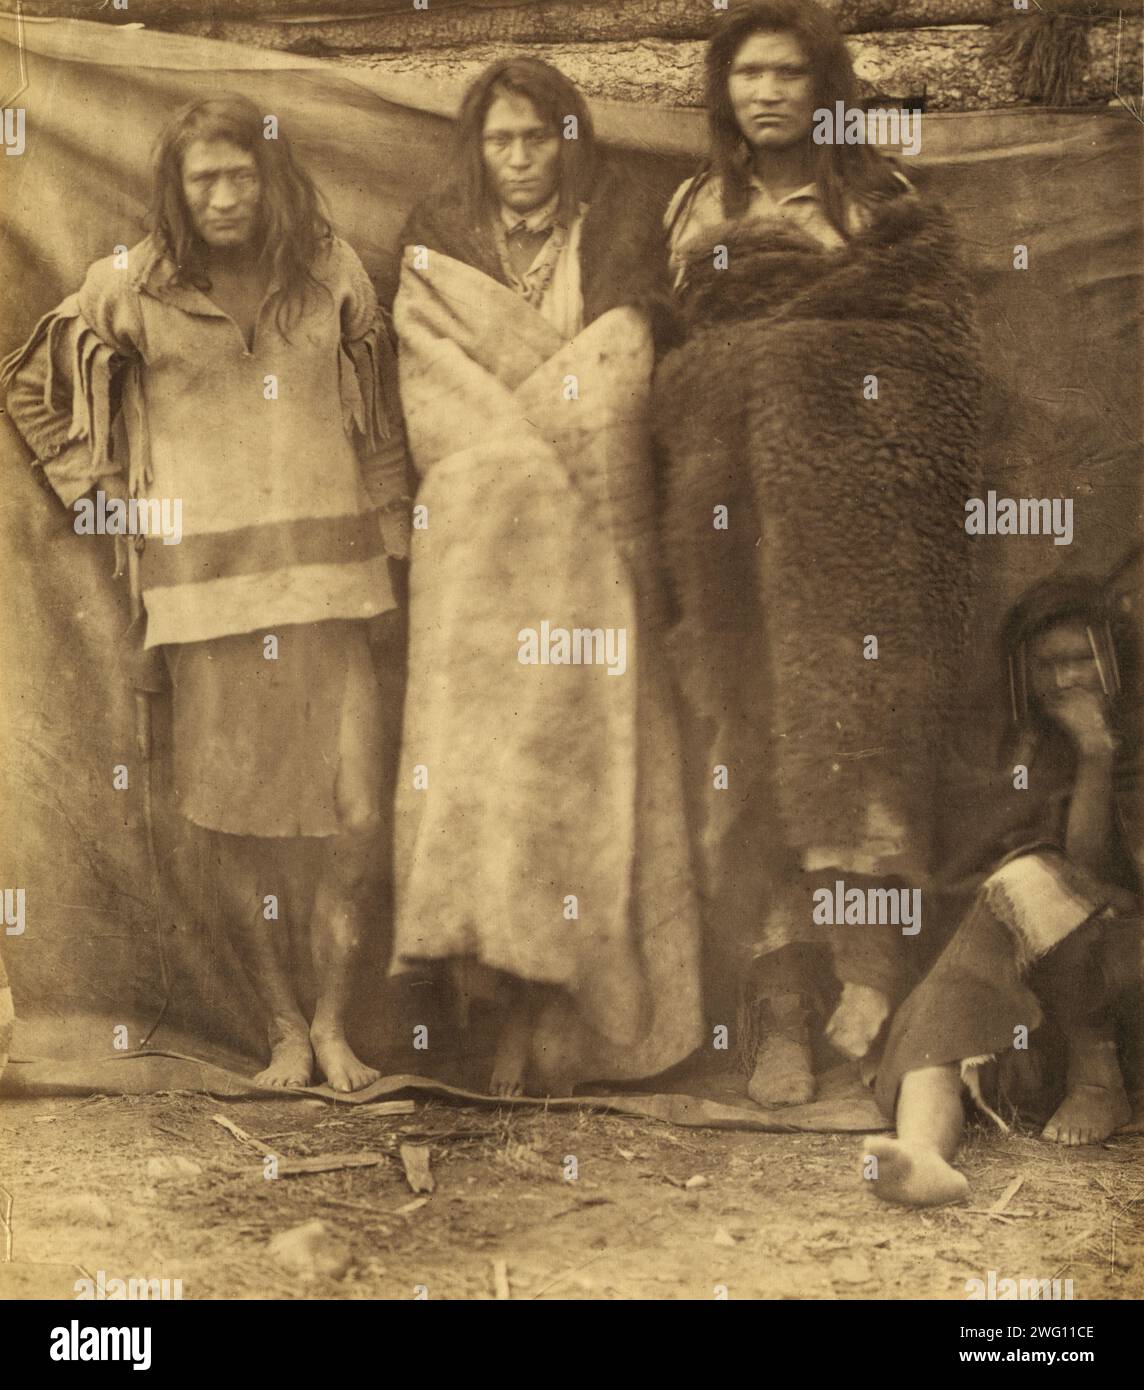 Group of Native Americans, three standing, one seated on the ground, possibly Colville or Kutenai, at the winter quarters of the British Northwest Boundary Commission Survey in Colville, Washington, 1860 or 1861. In: Photographs of British Northwest Boundary Survey, 1858-1861. Stock Photo